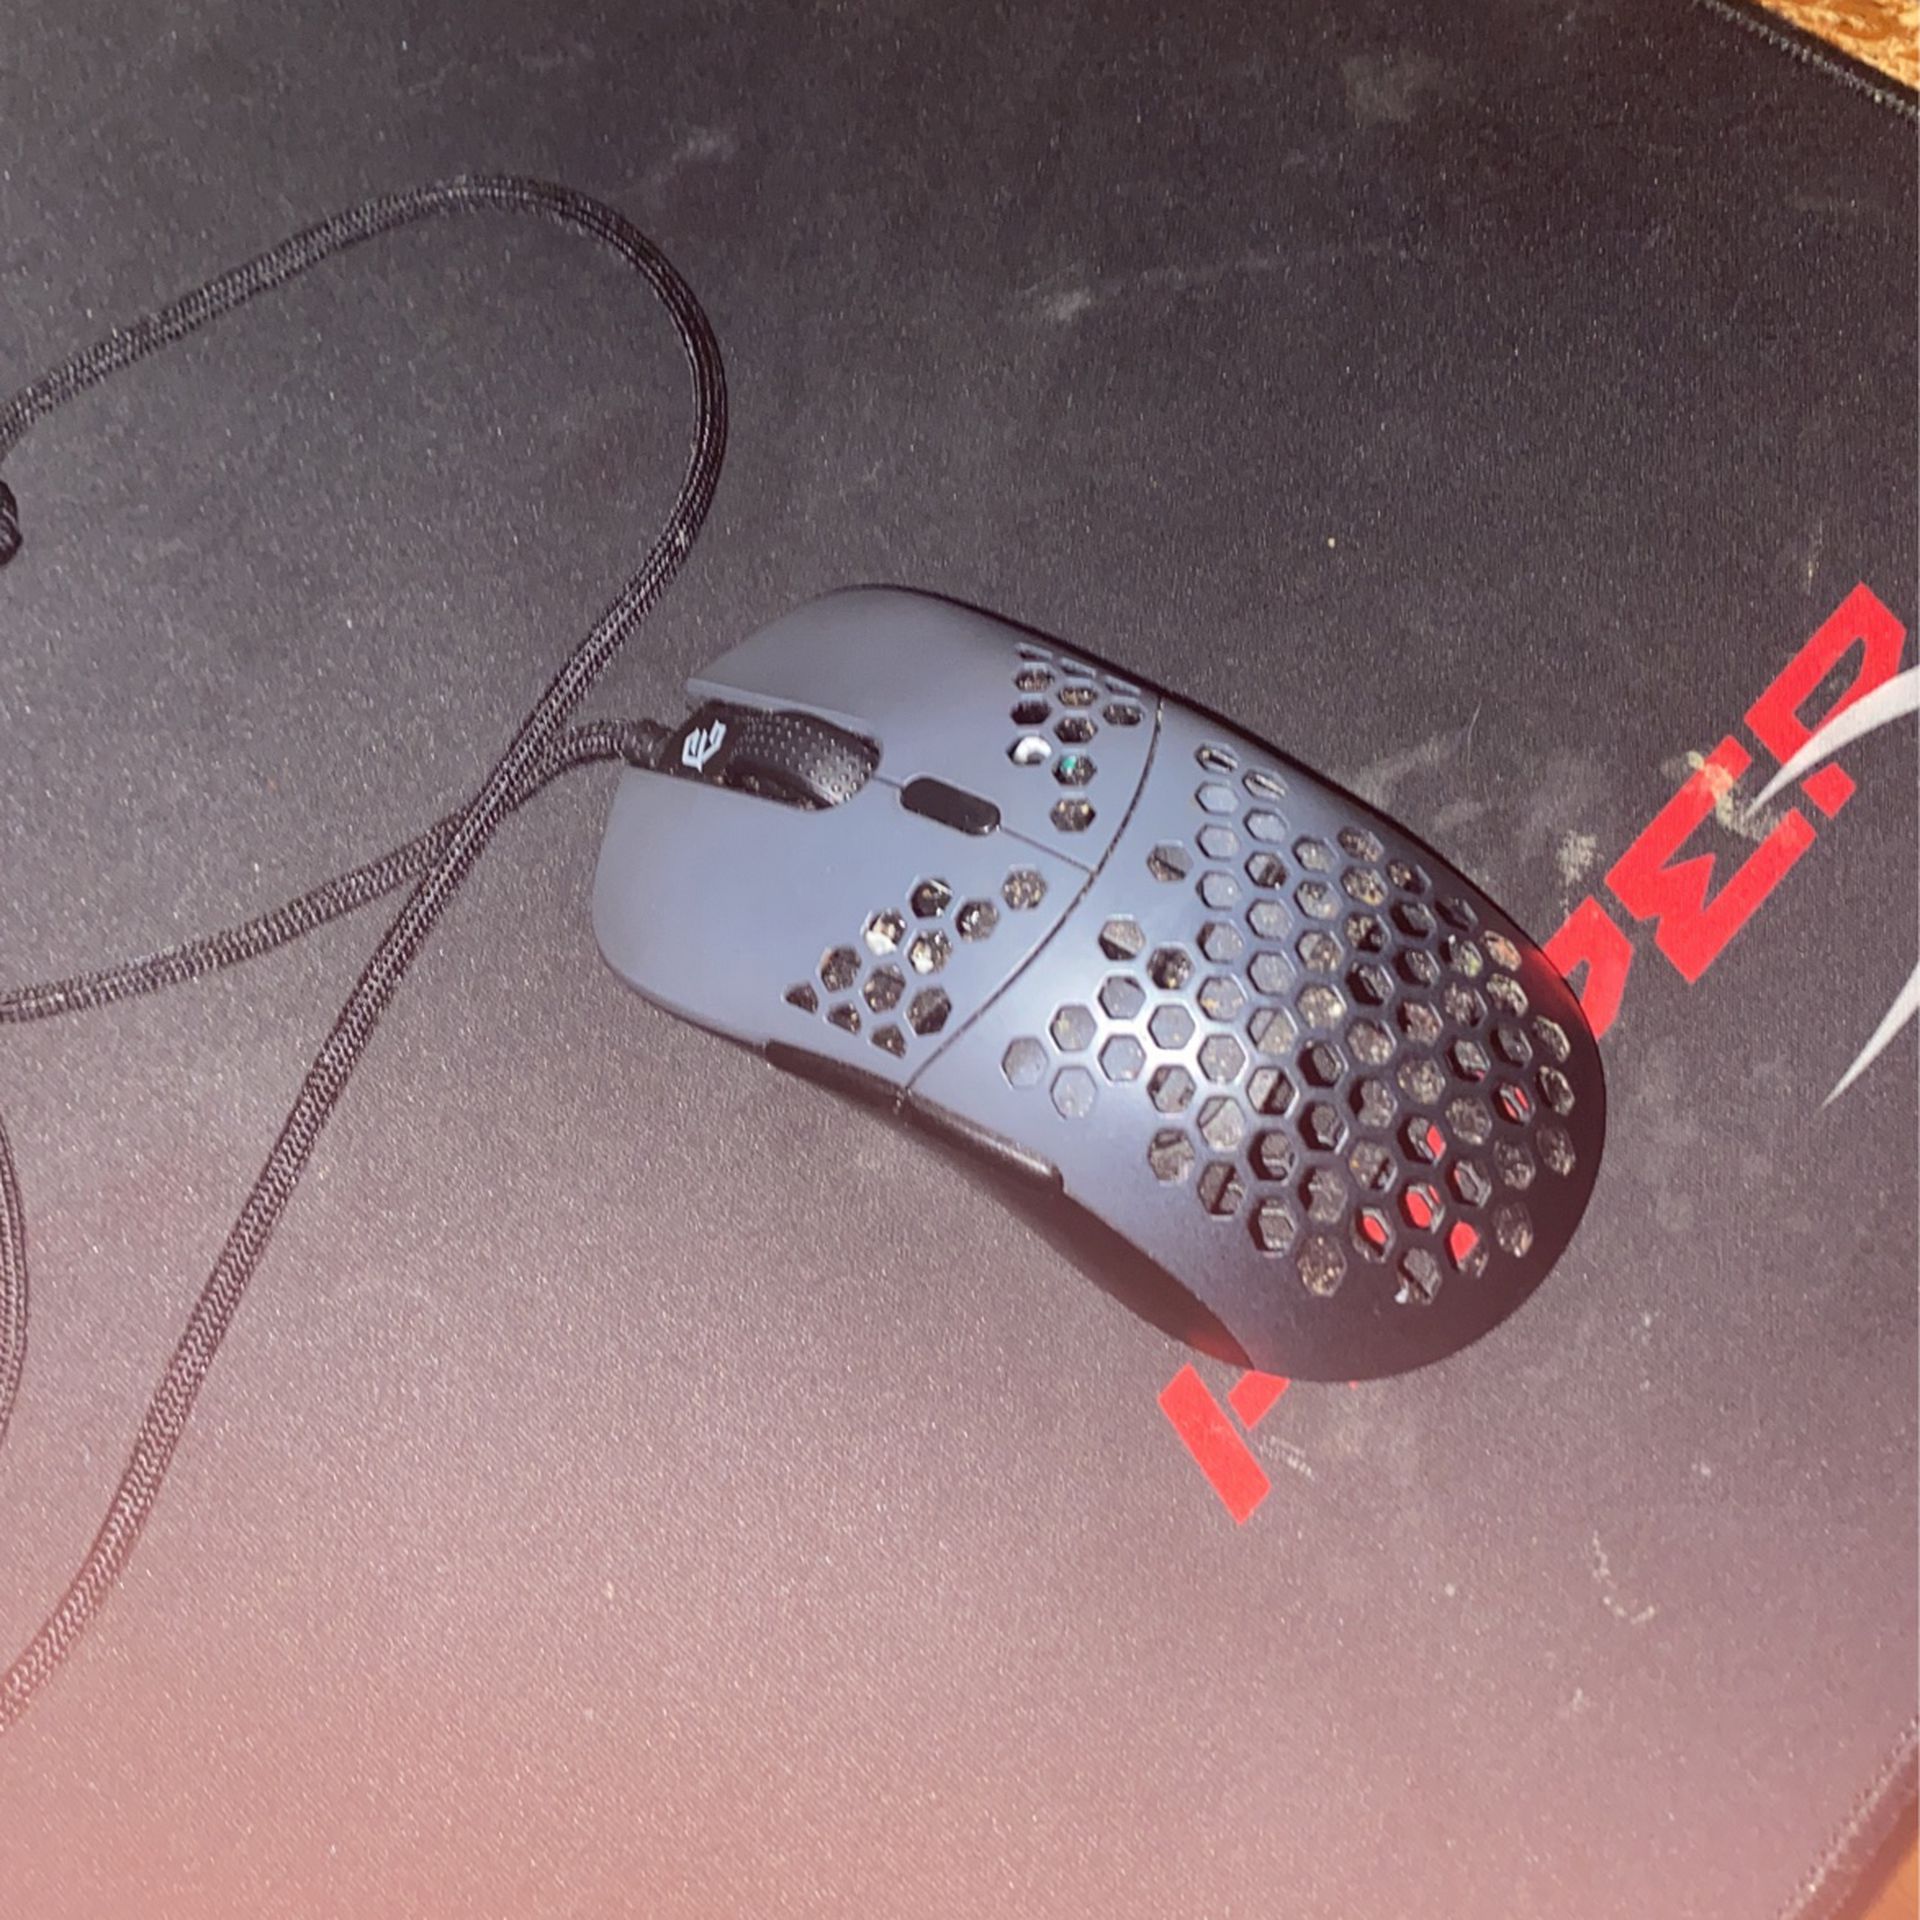 G Wolves Hati gaming mouse